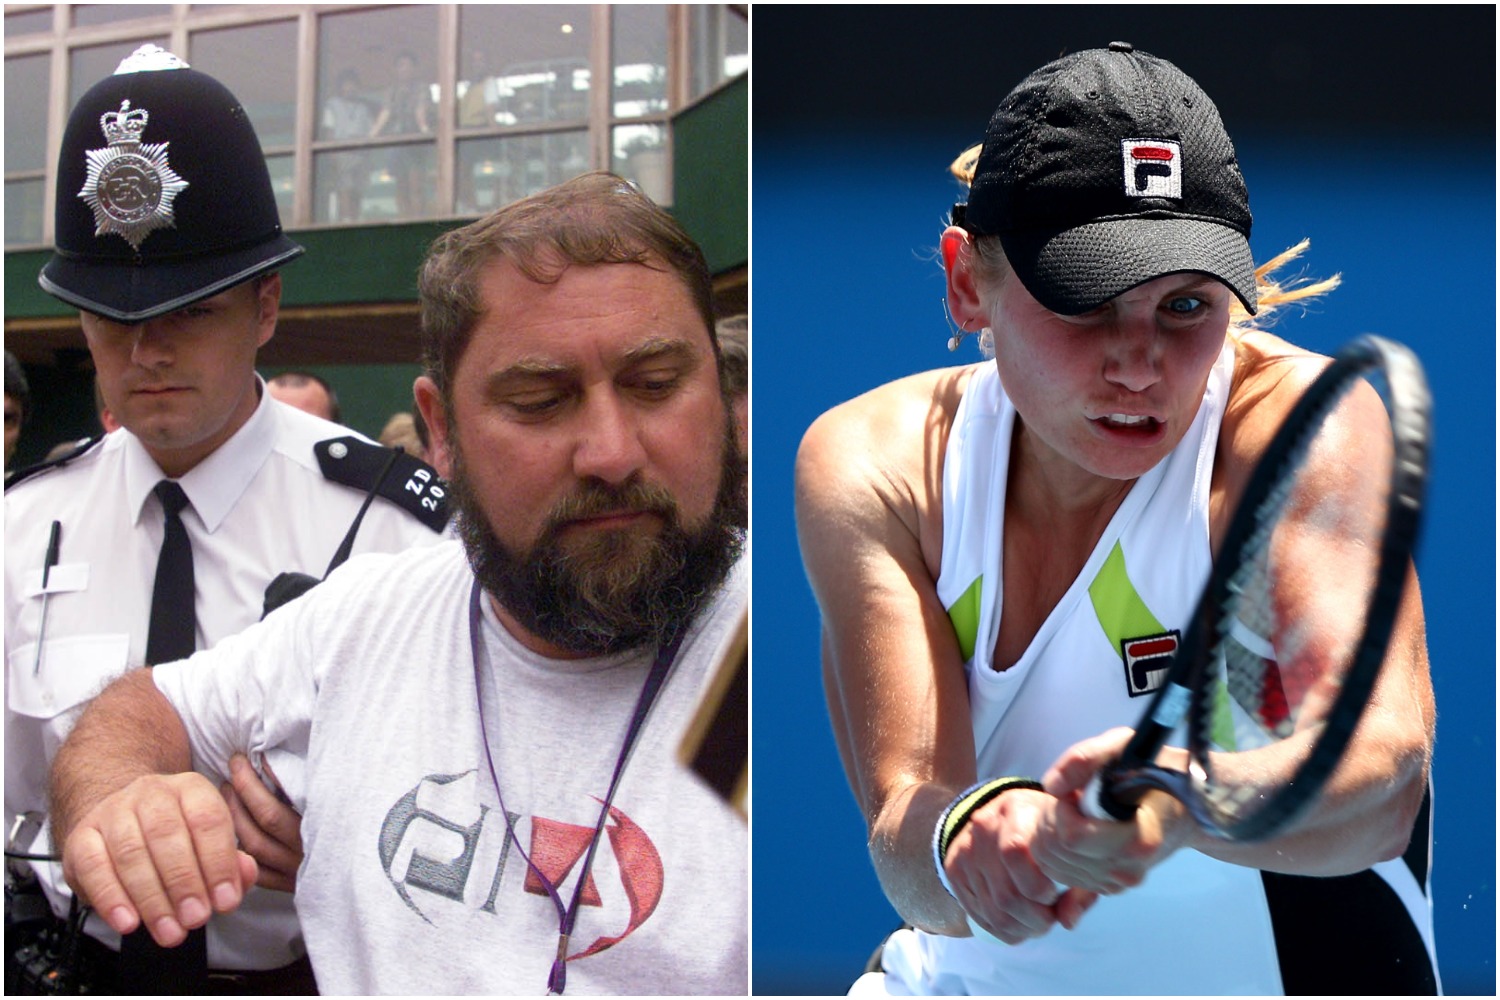 Tennis legend Jelena Dokic finally cut ties with her abusive father, Damir Dokic, after bizarre incidents involving Nazis and salmon.